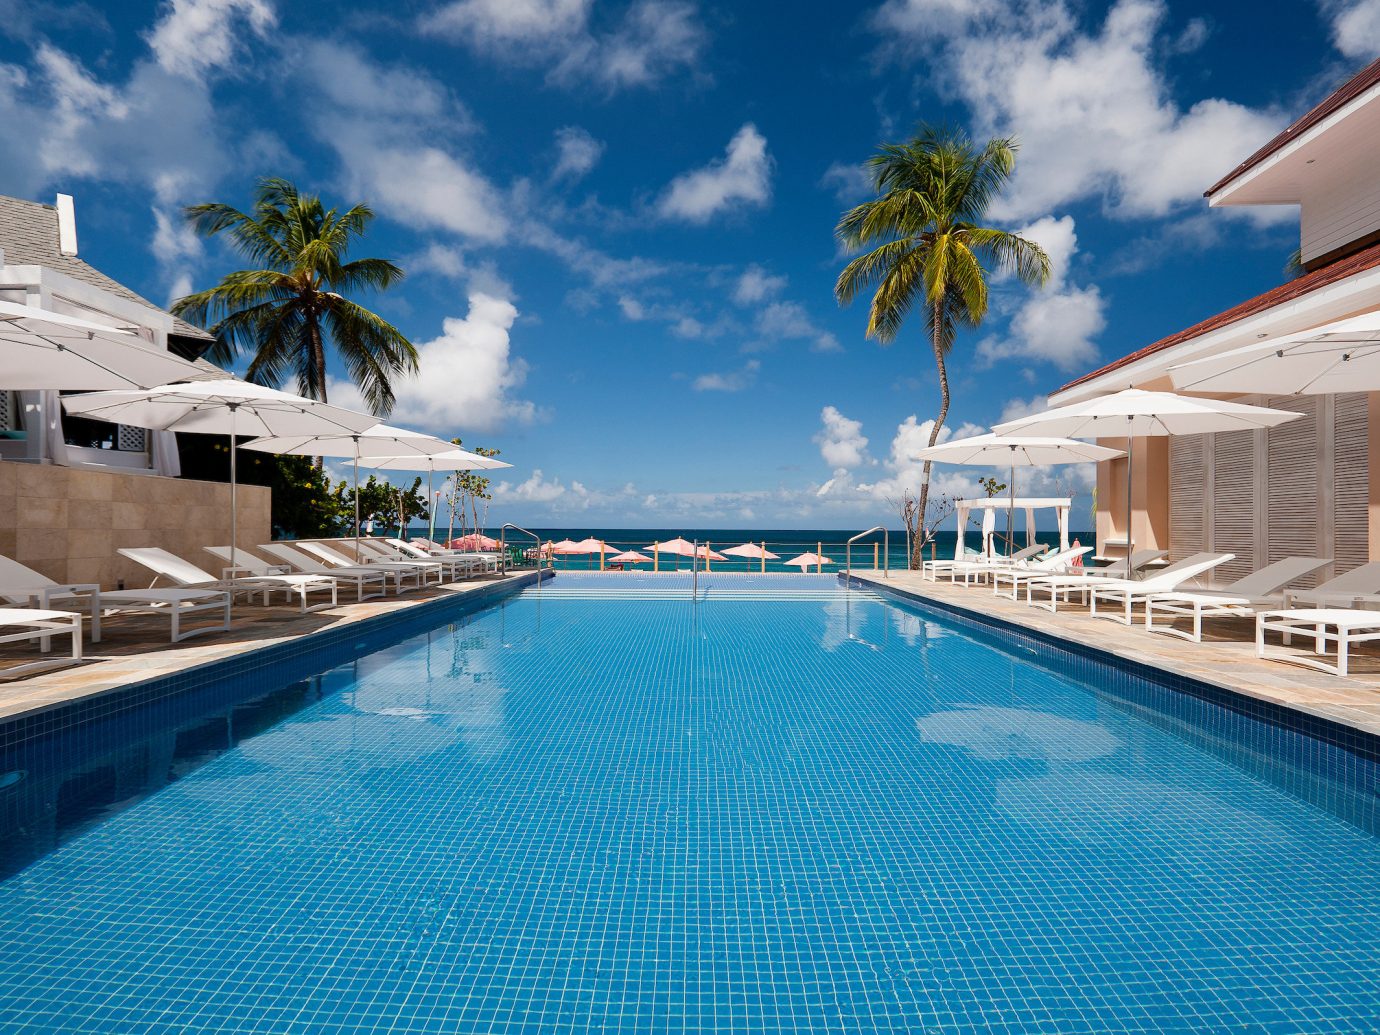 Pool at BodyHoliday, St. Lucia